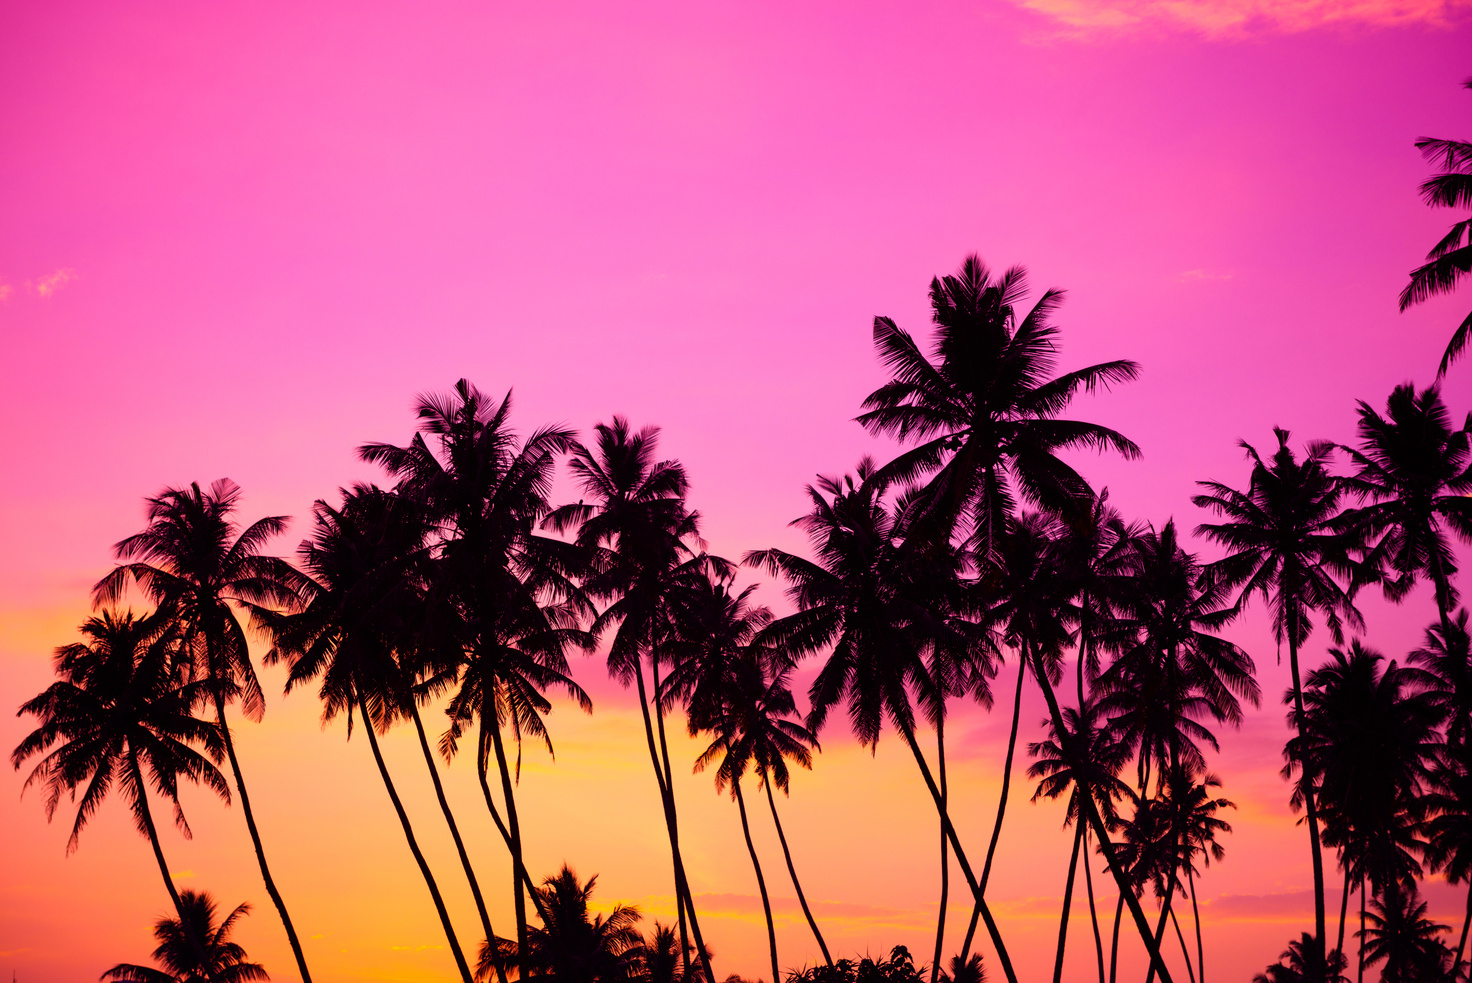 Tropical palm trees silhouettes